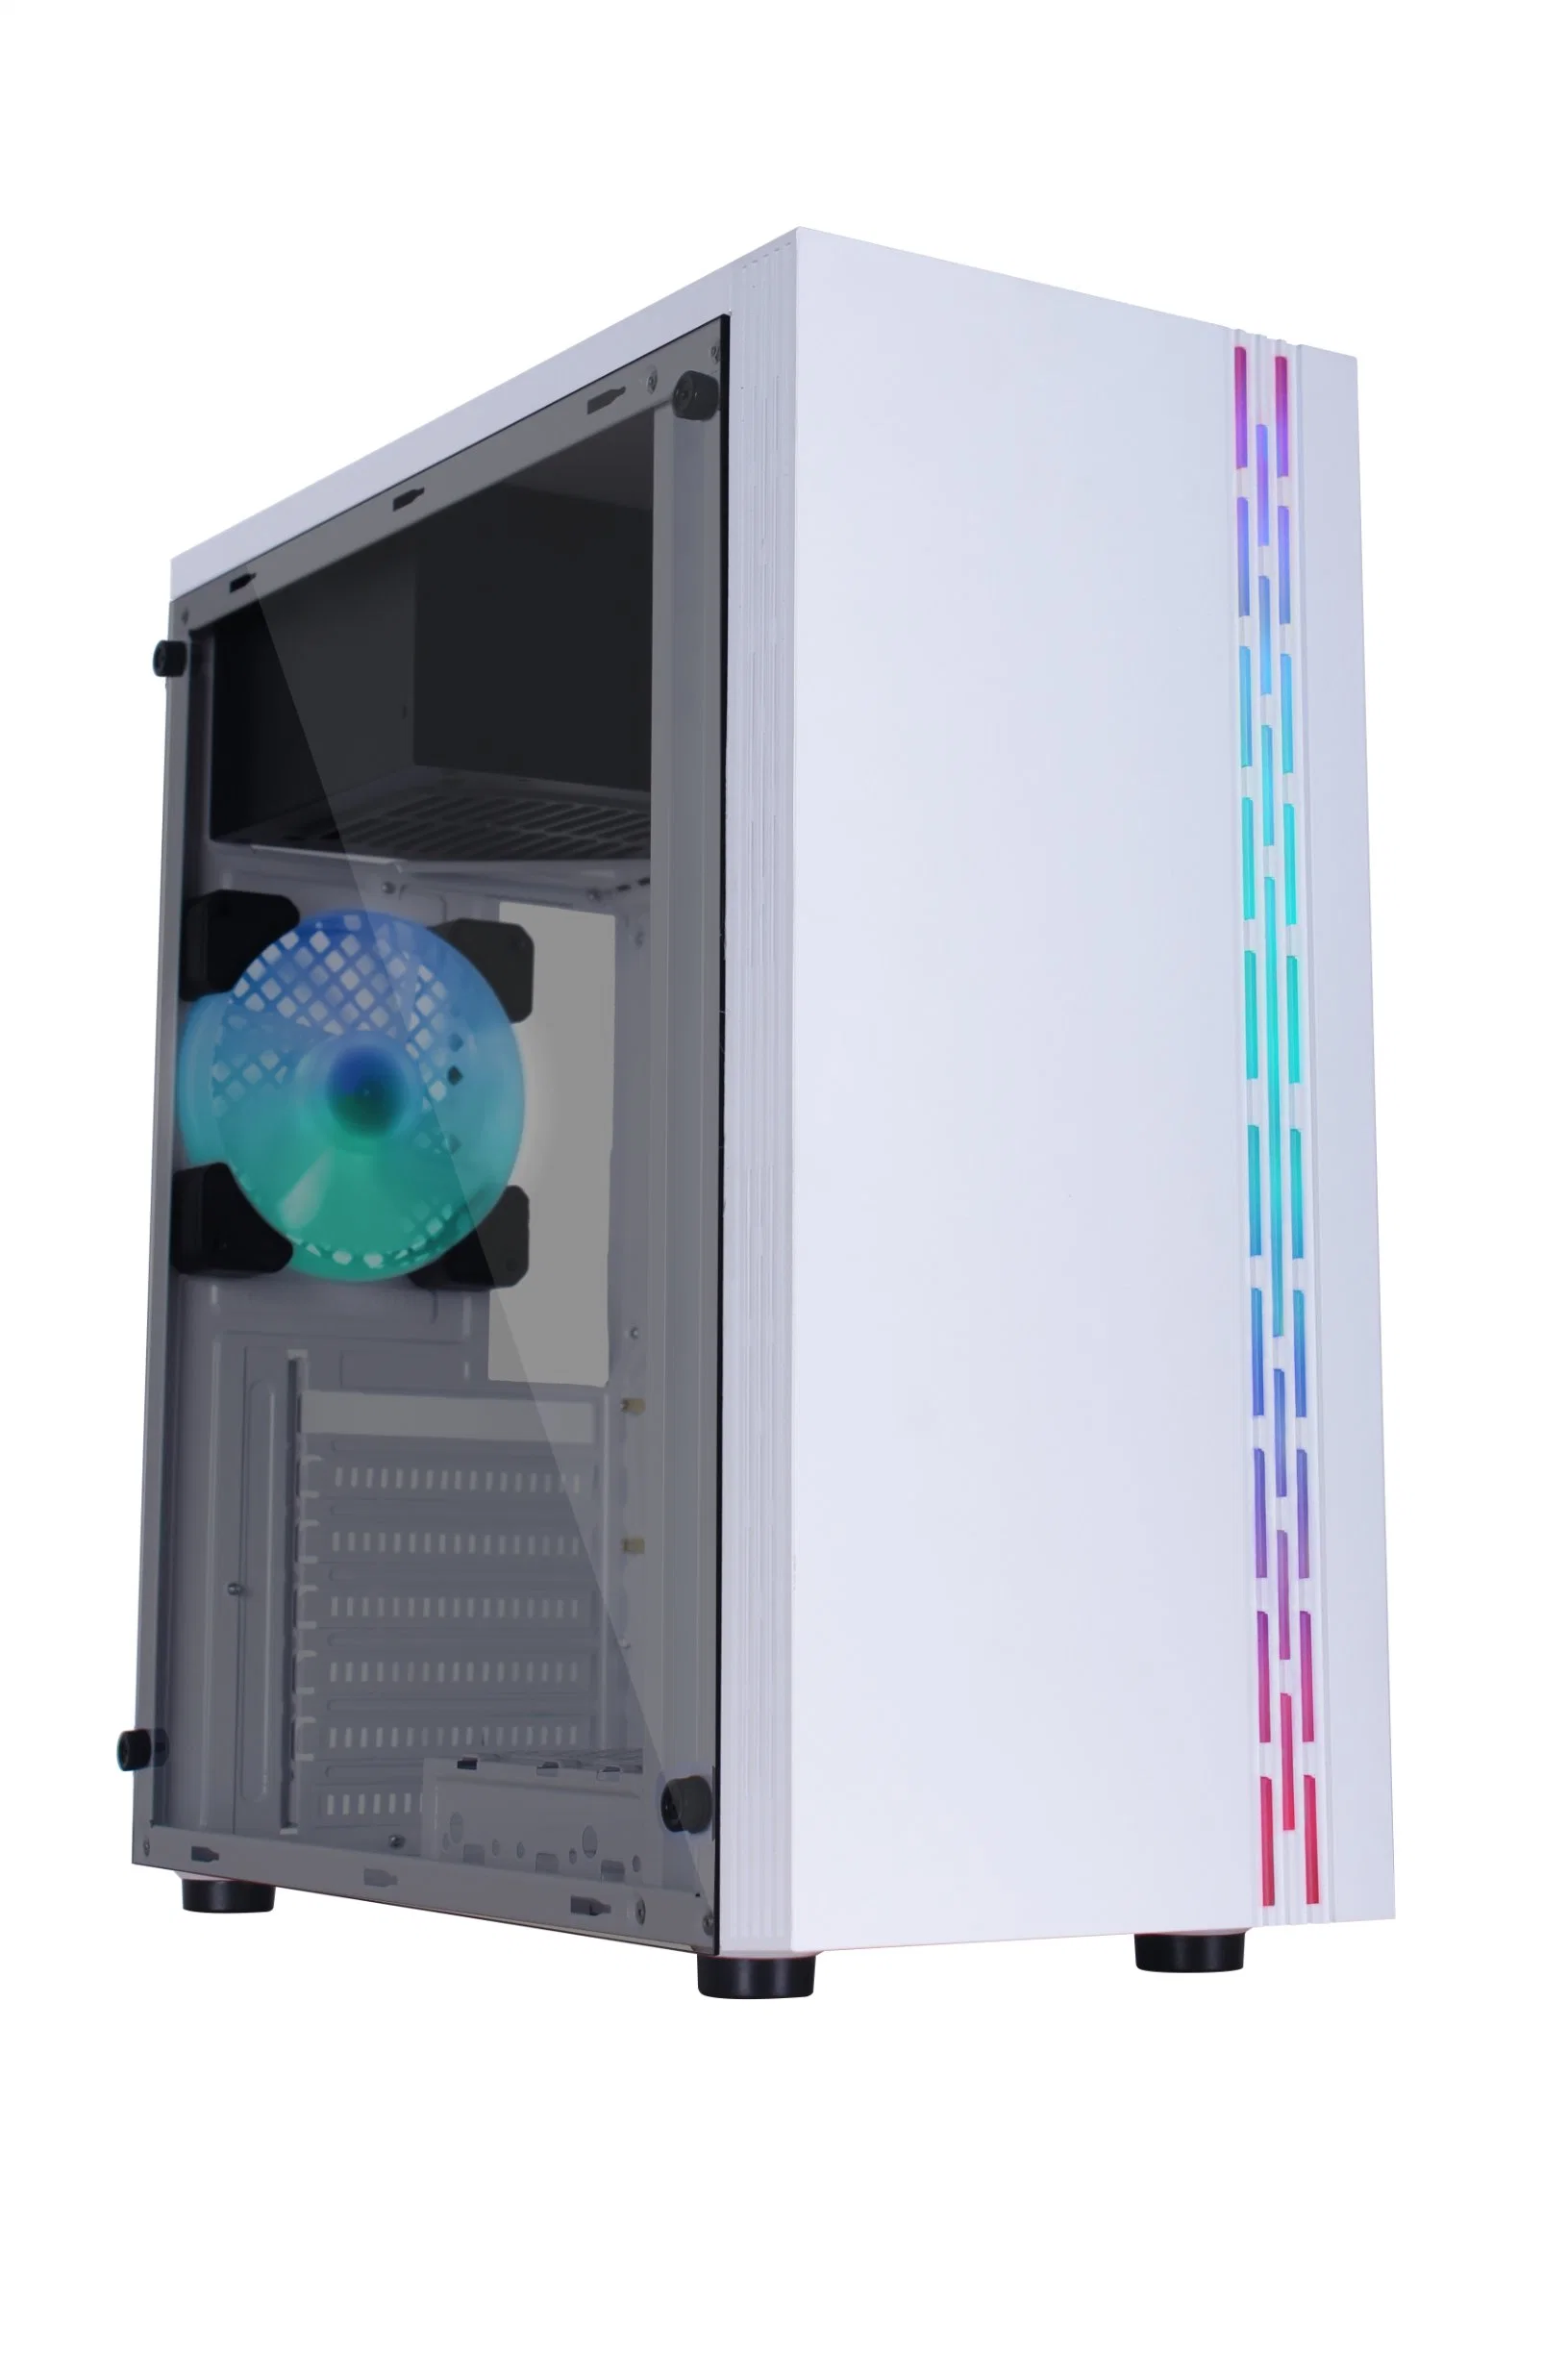 Gamer Case ATX PC Tower Computer Case with Shining LED Strip